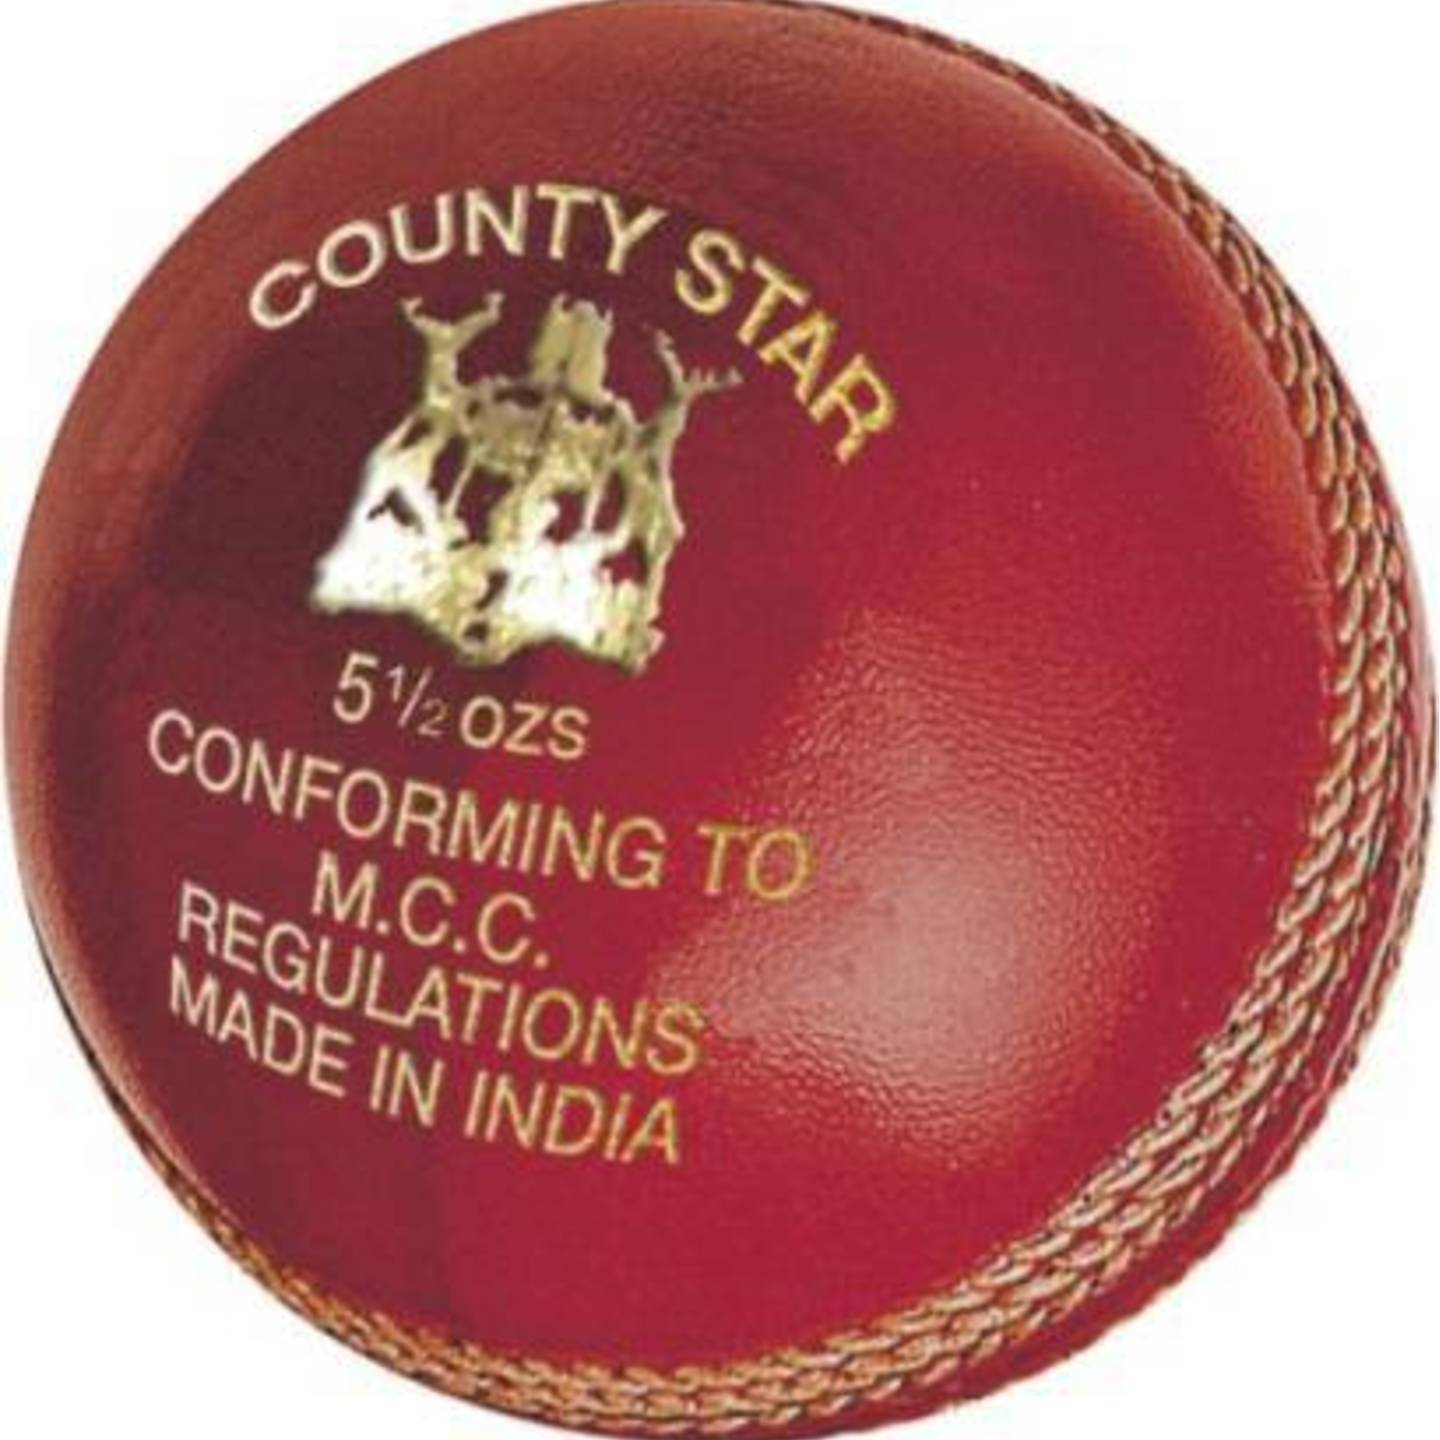 GM COUNTY STAR RED LEATHER CRICKET BALL